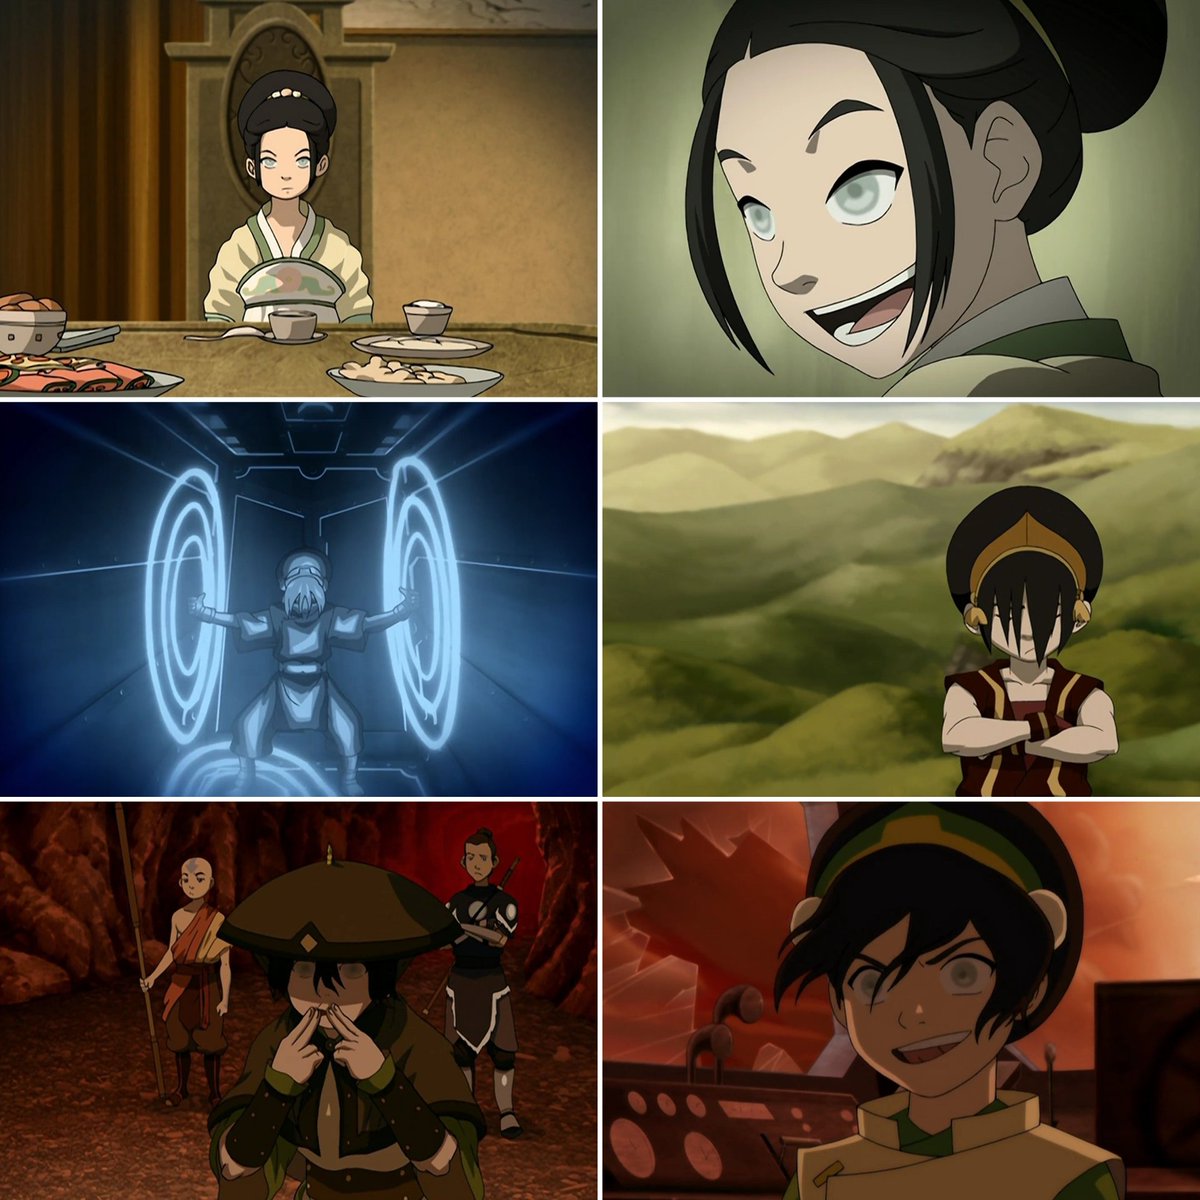 Appreciation post for Toph Beifong